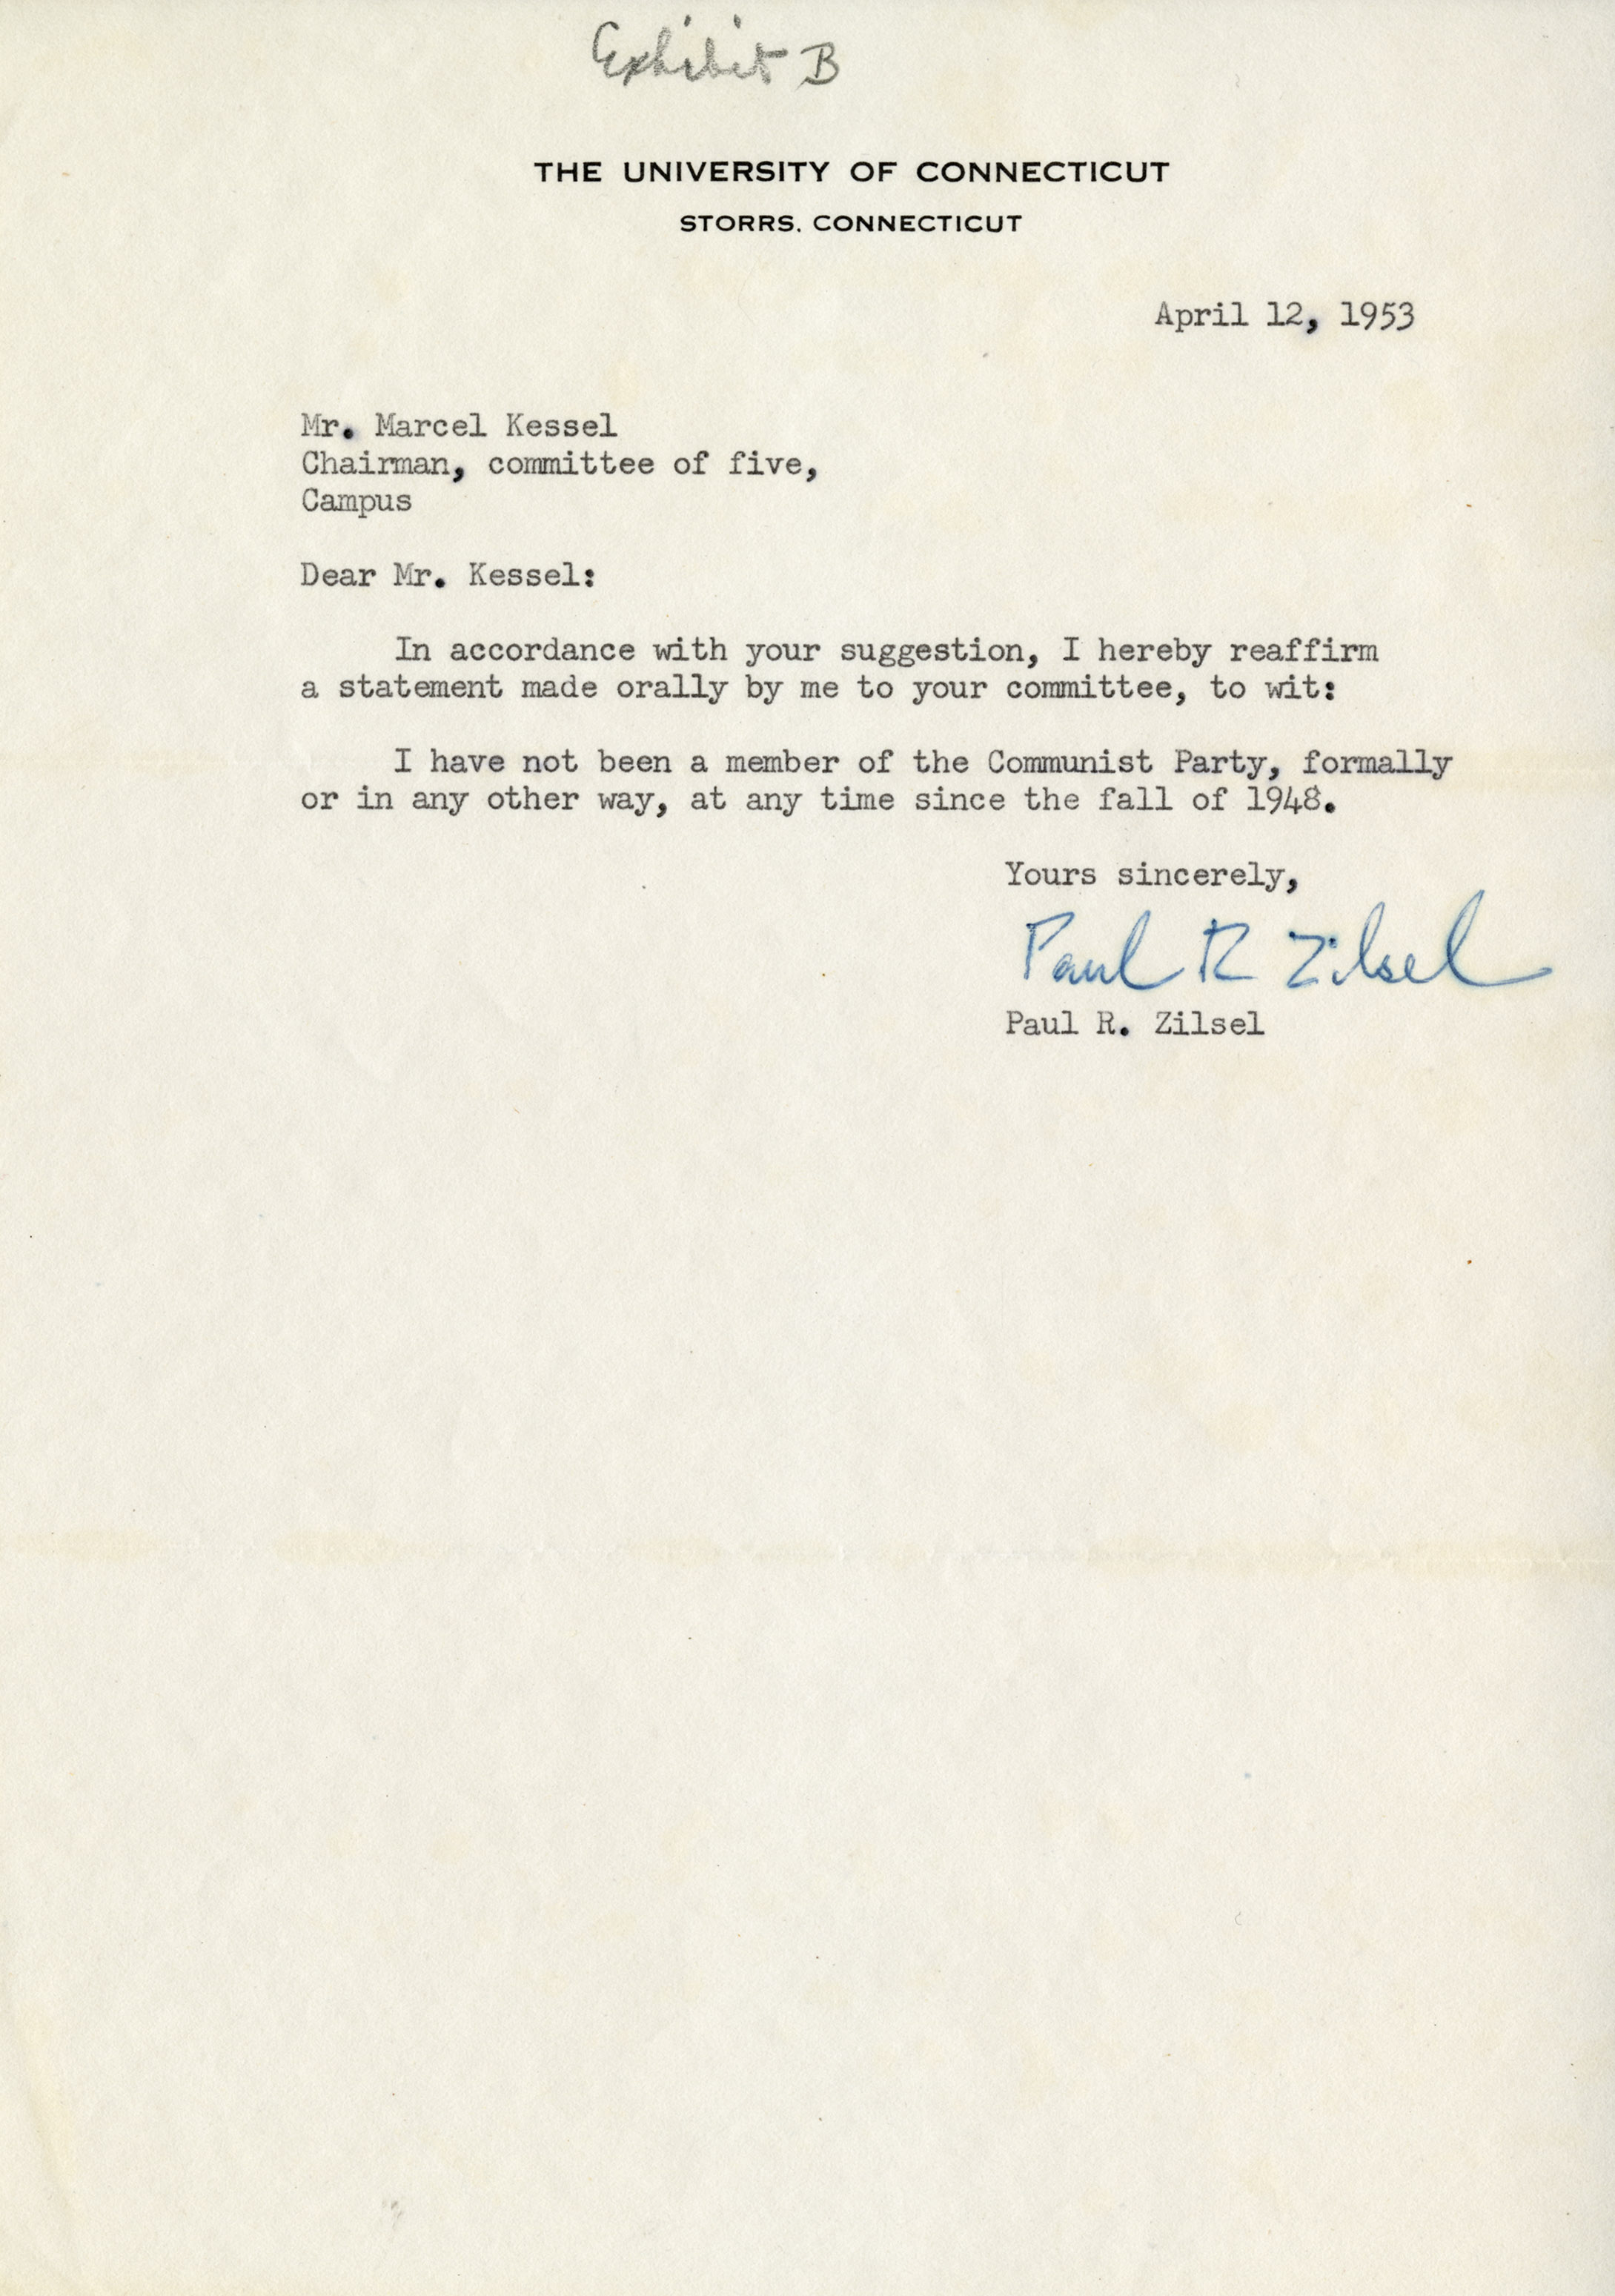 Letter written April 12, 1953, from UConn Professor Paul R. Zilsel, where he affirms that he is not a member of the Communist Party